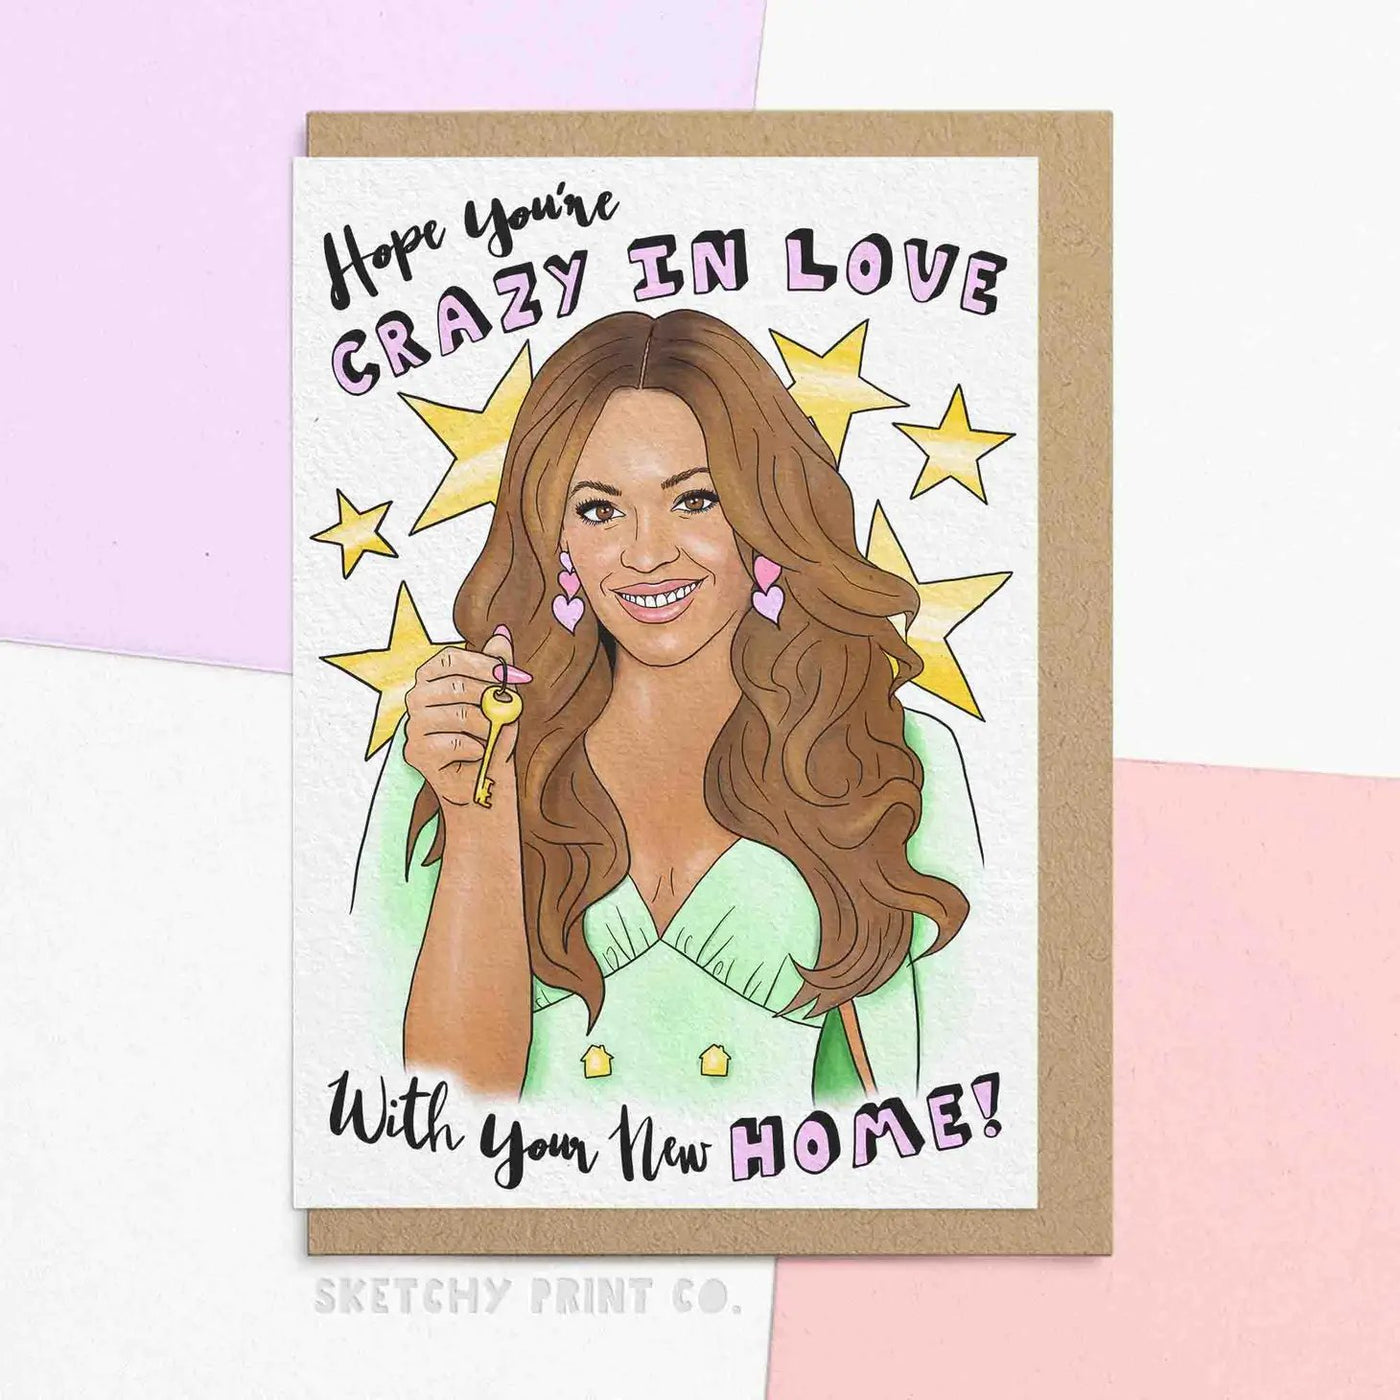 Celebration Card - Hope you're CRAZY IN LOVE with your new HOME! - All Things Real Estate